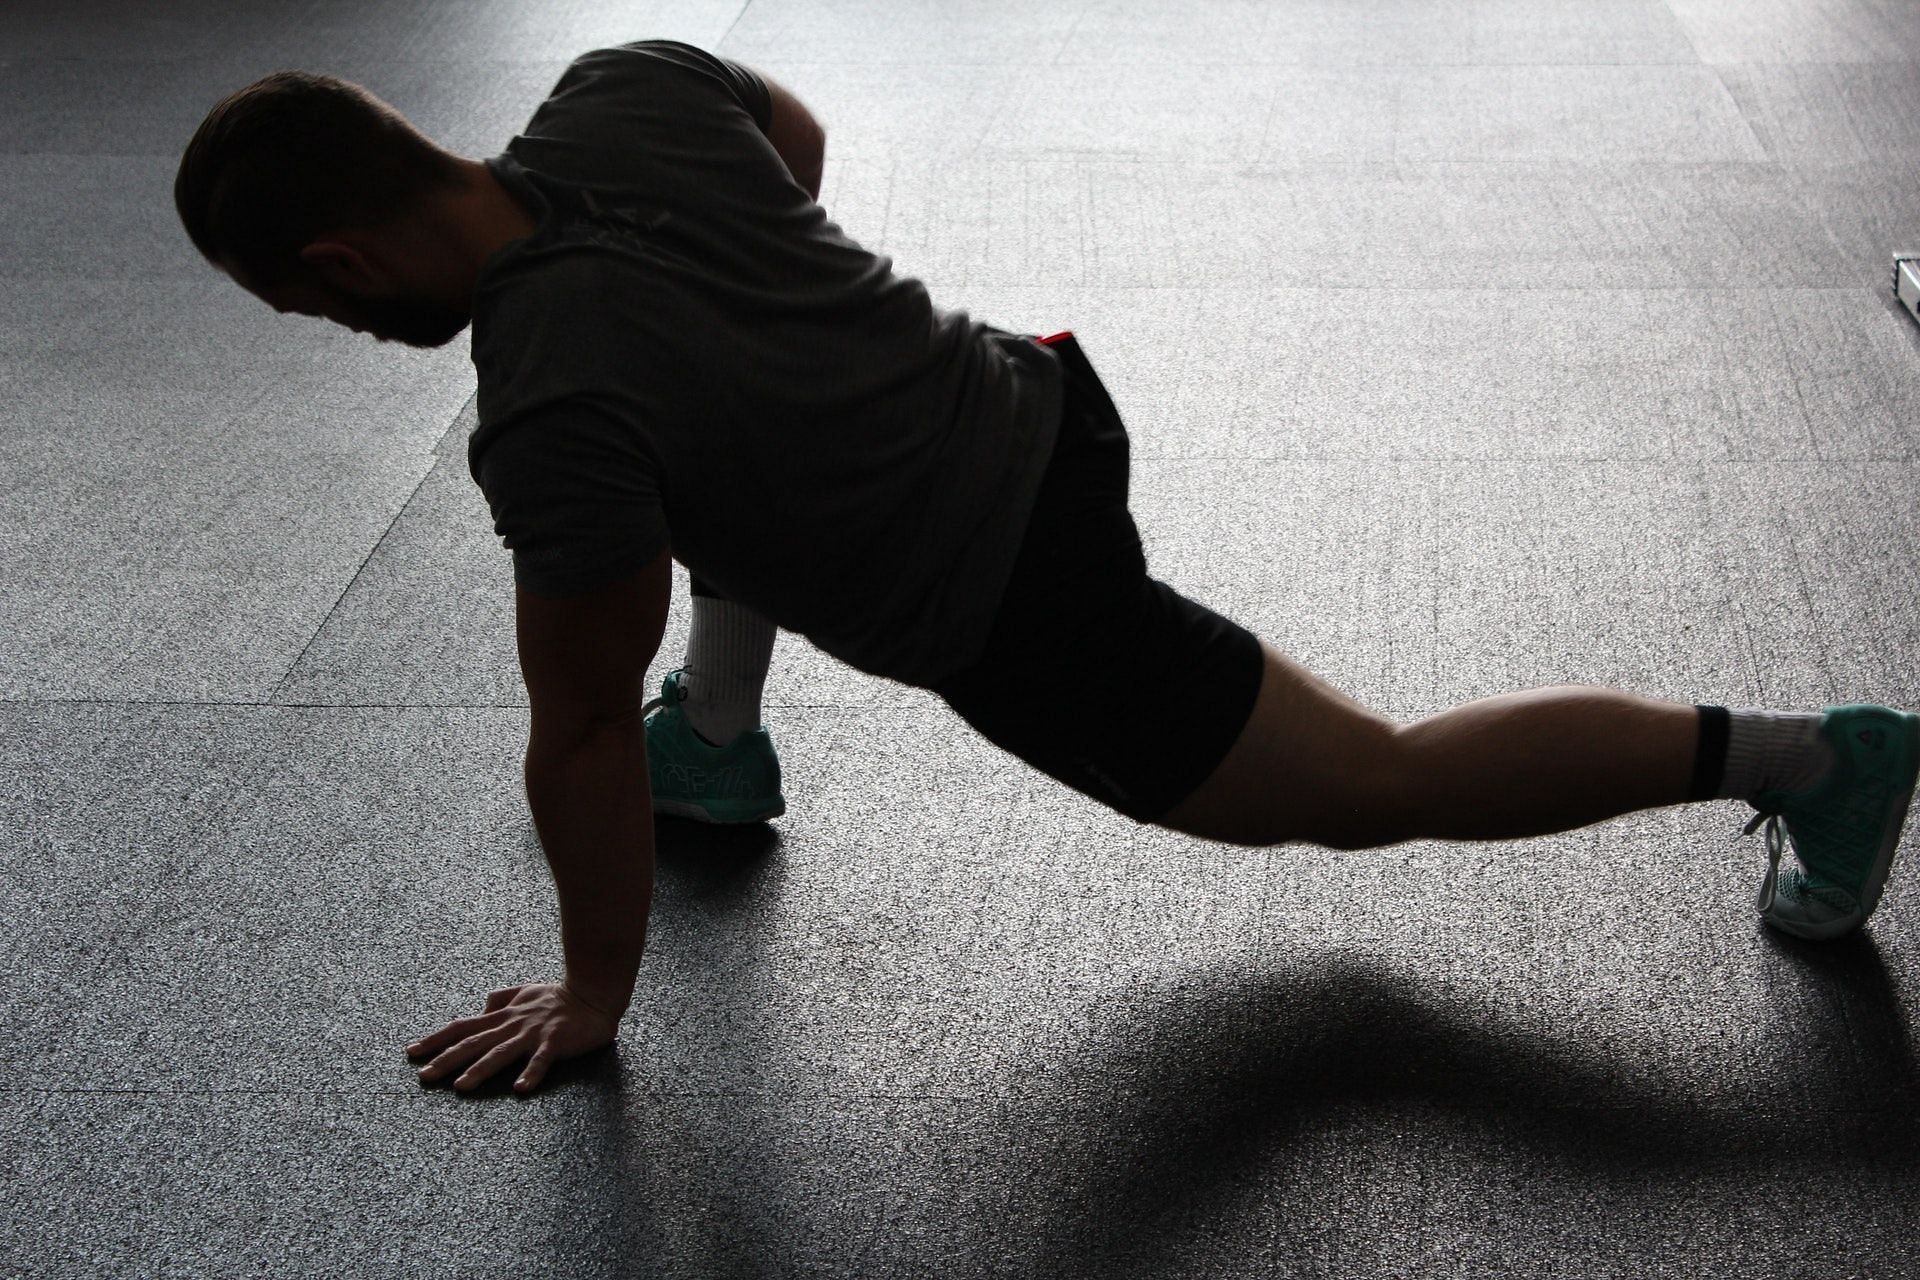 Best exercises to strengthen your back and core. (Image via Pexels/Photo by Pixabay)